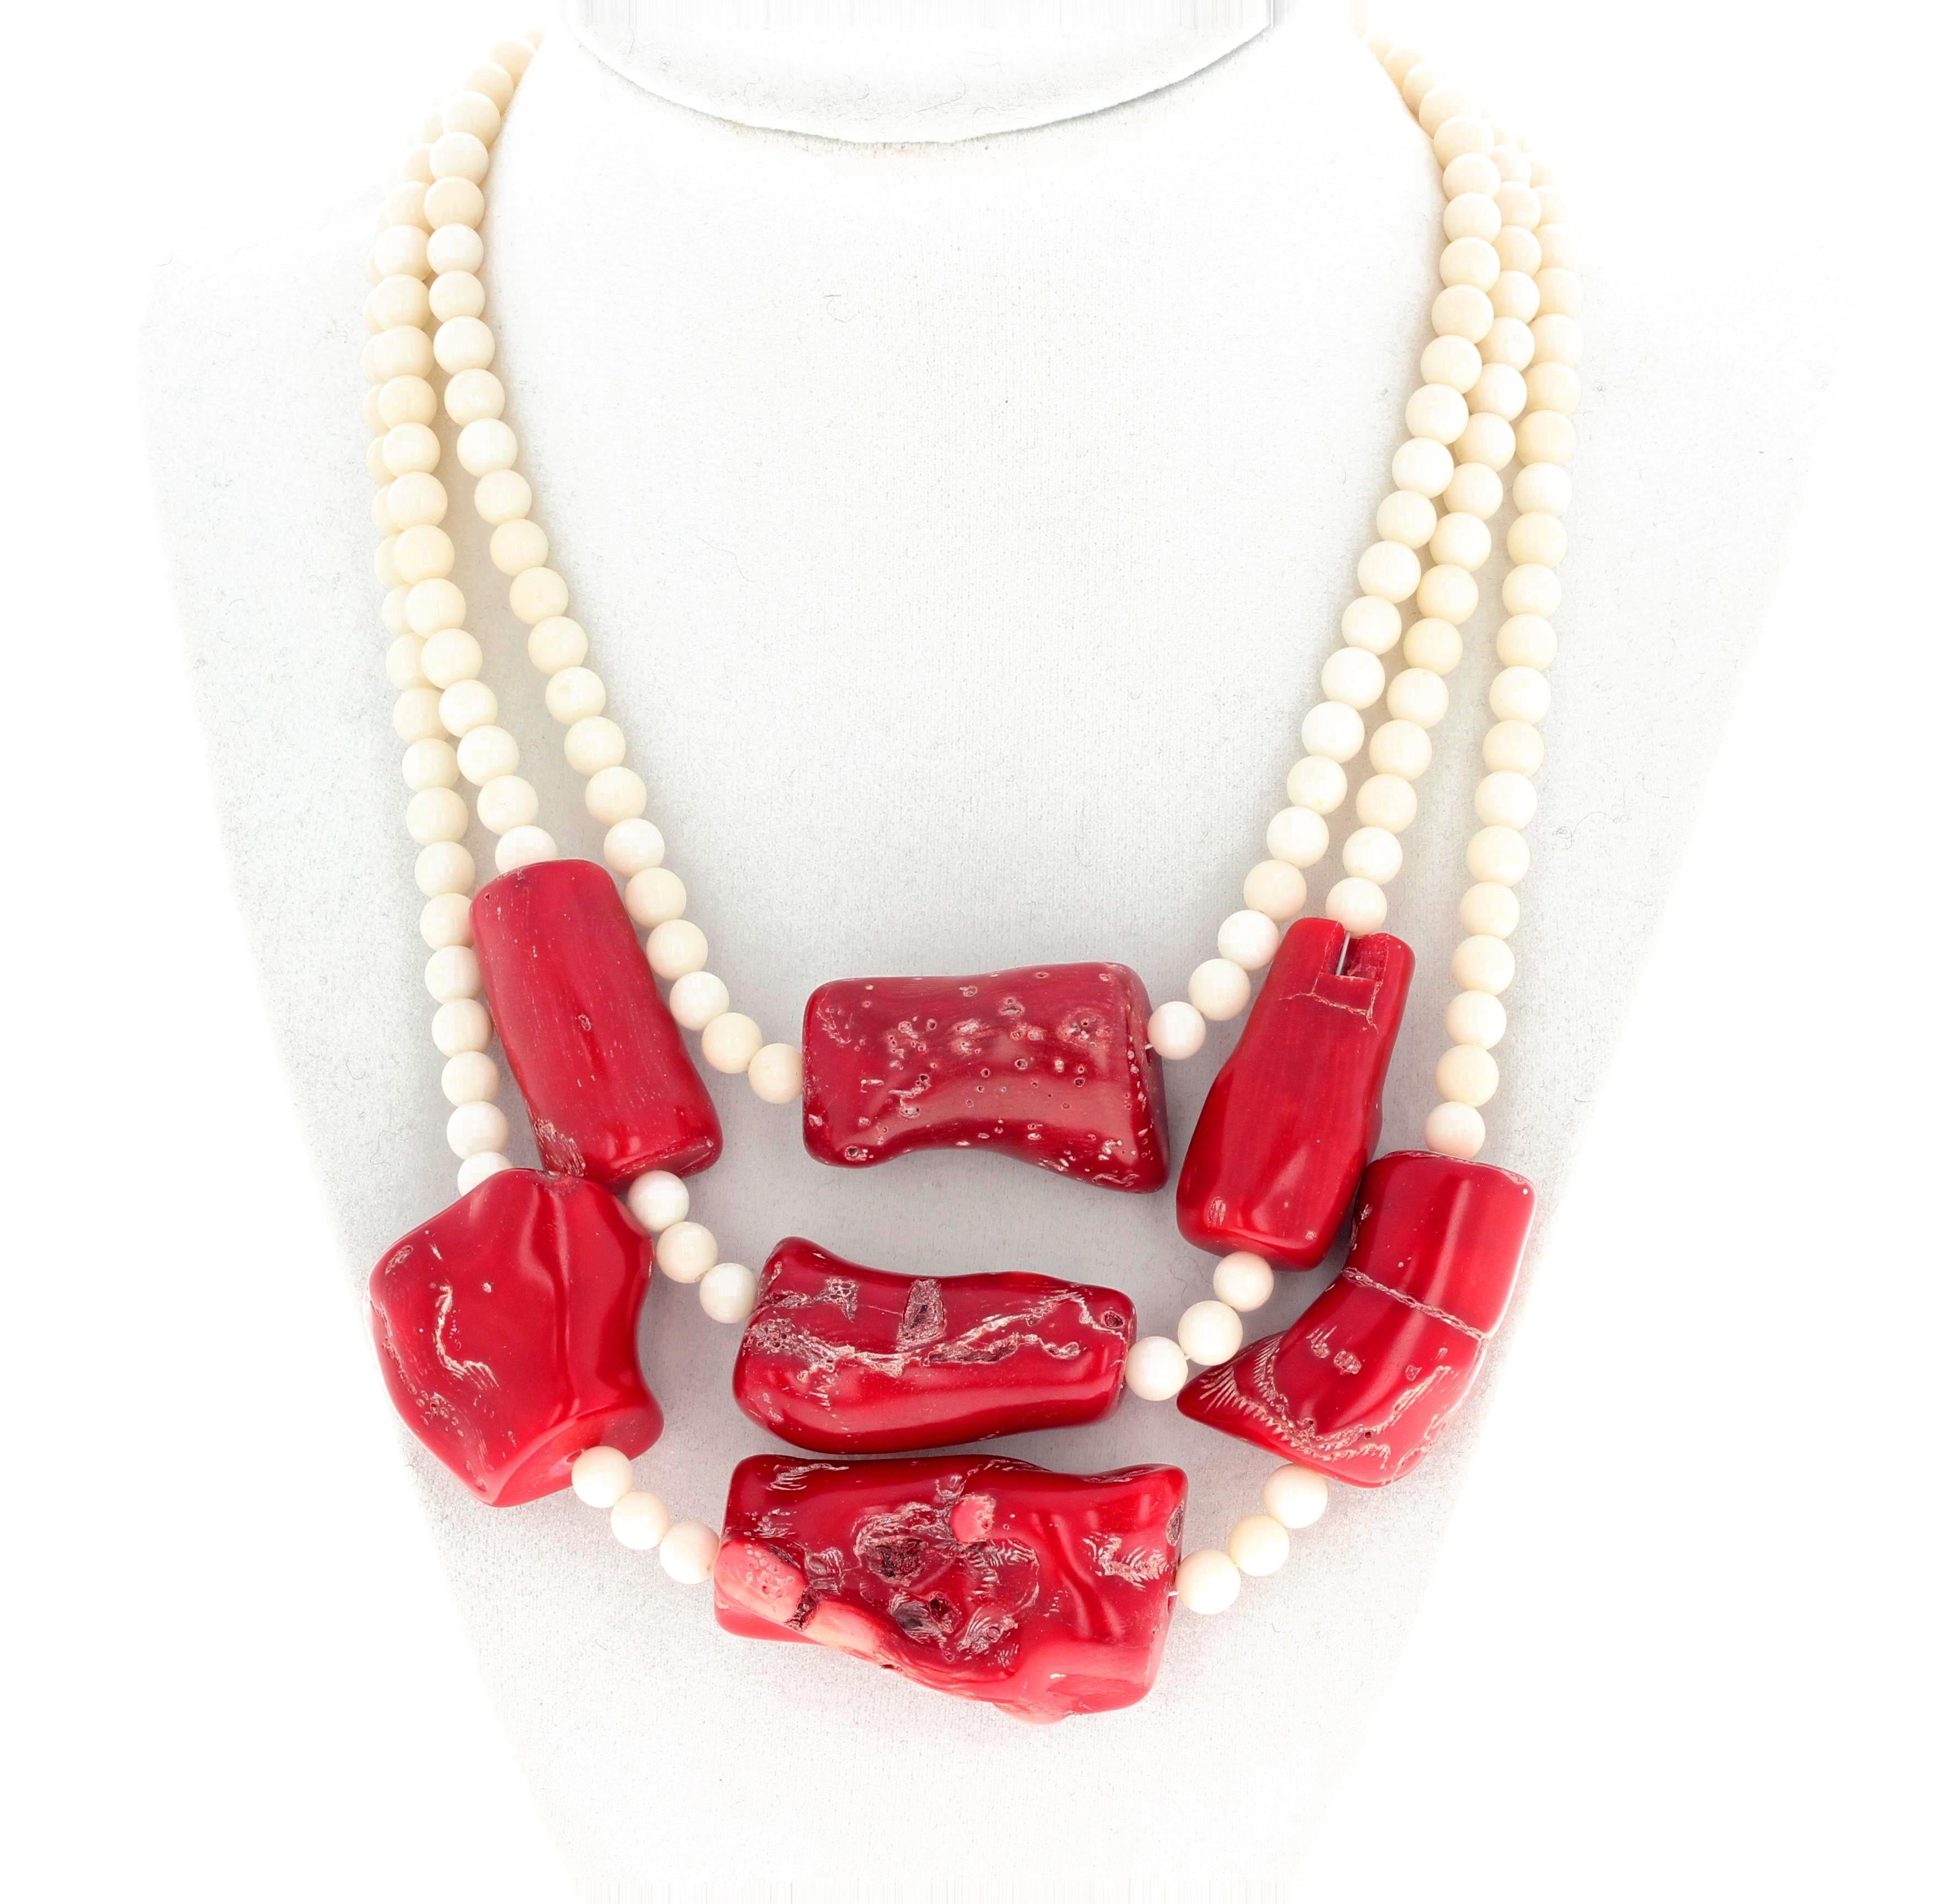 Mixed Cut AJD Huge Dramatic Stunning Real Red Coral & White Coral Triple Strand Necklace